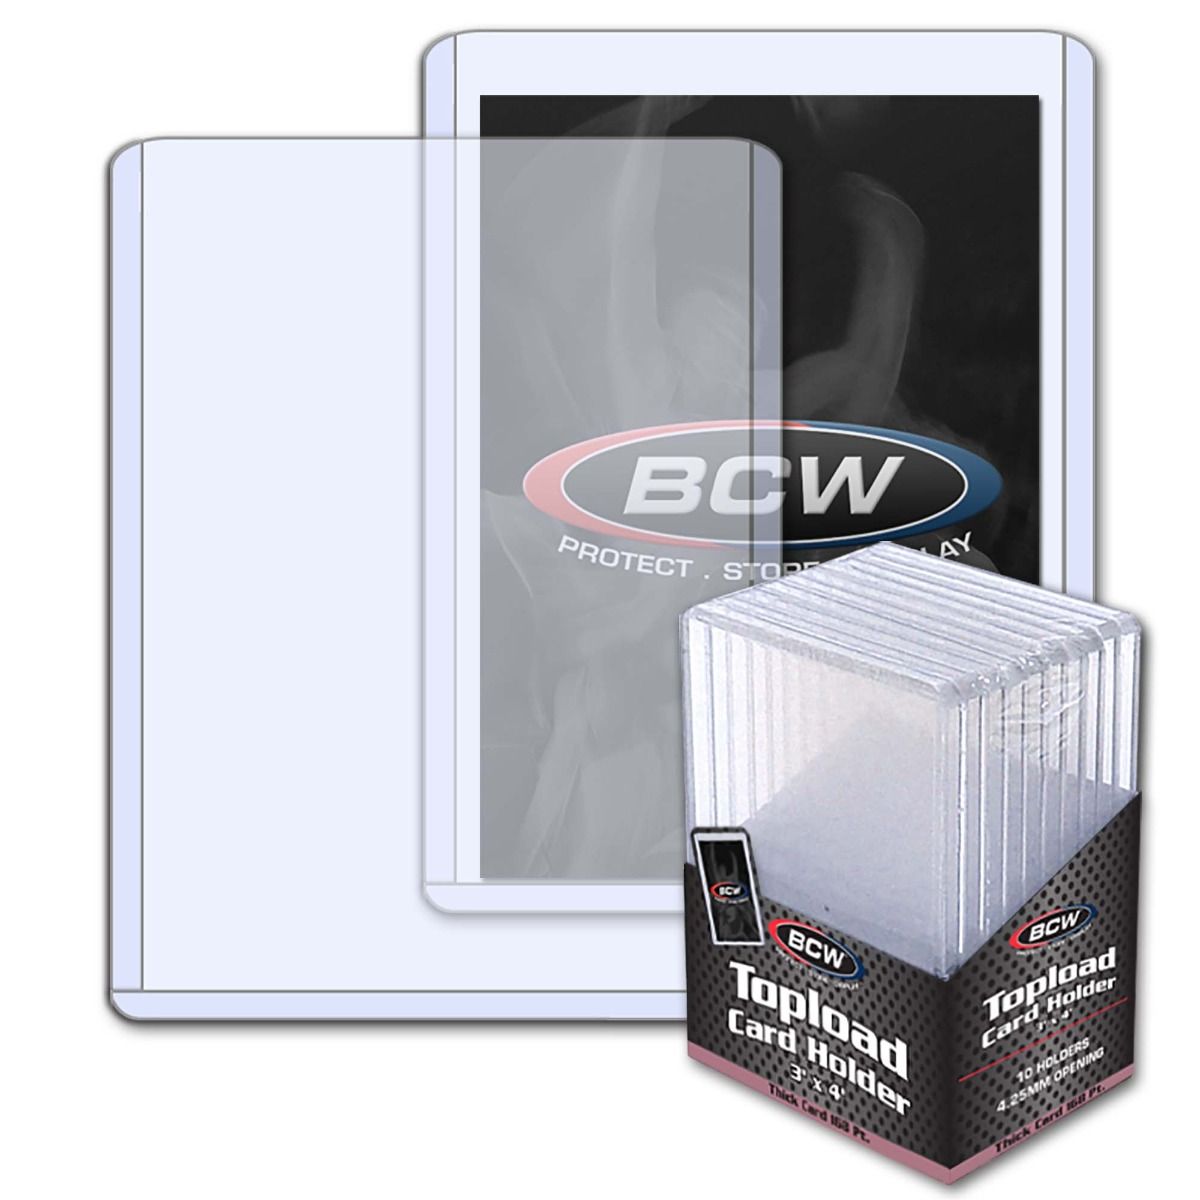 BCW - Thick Card Toploader - 5pk